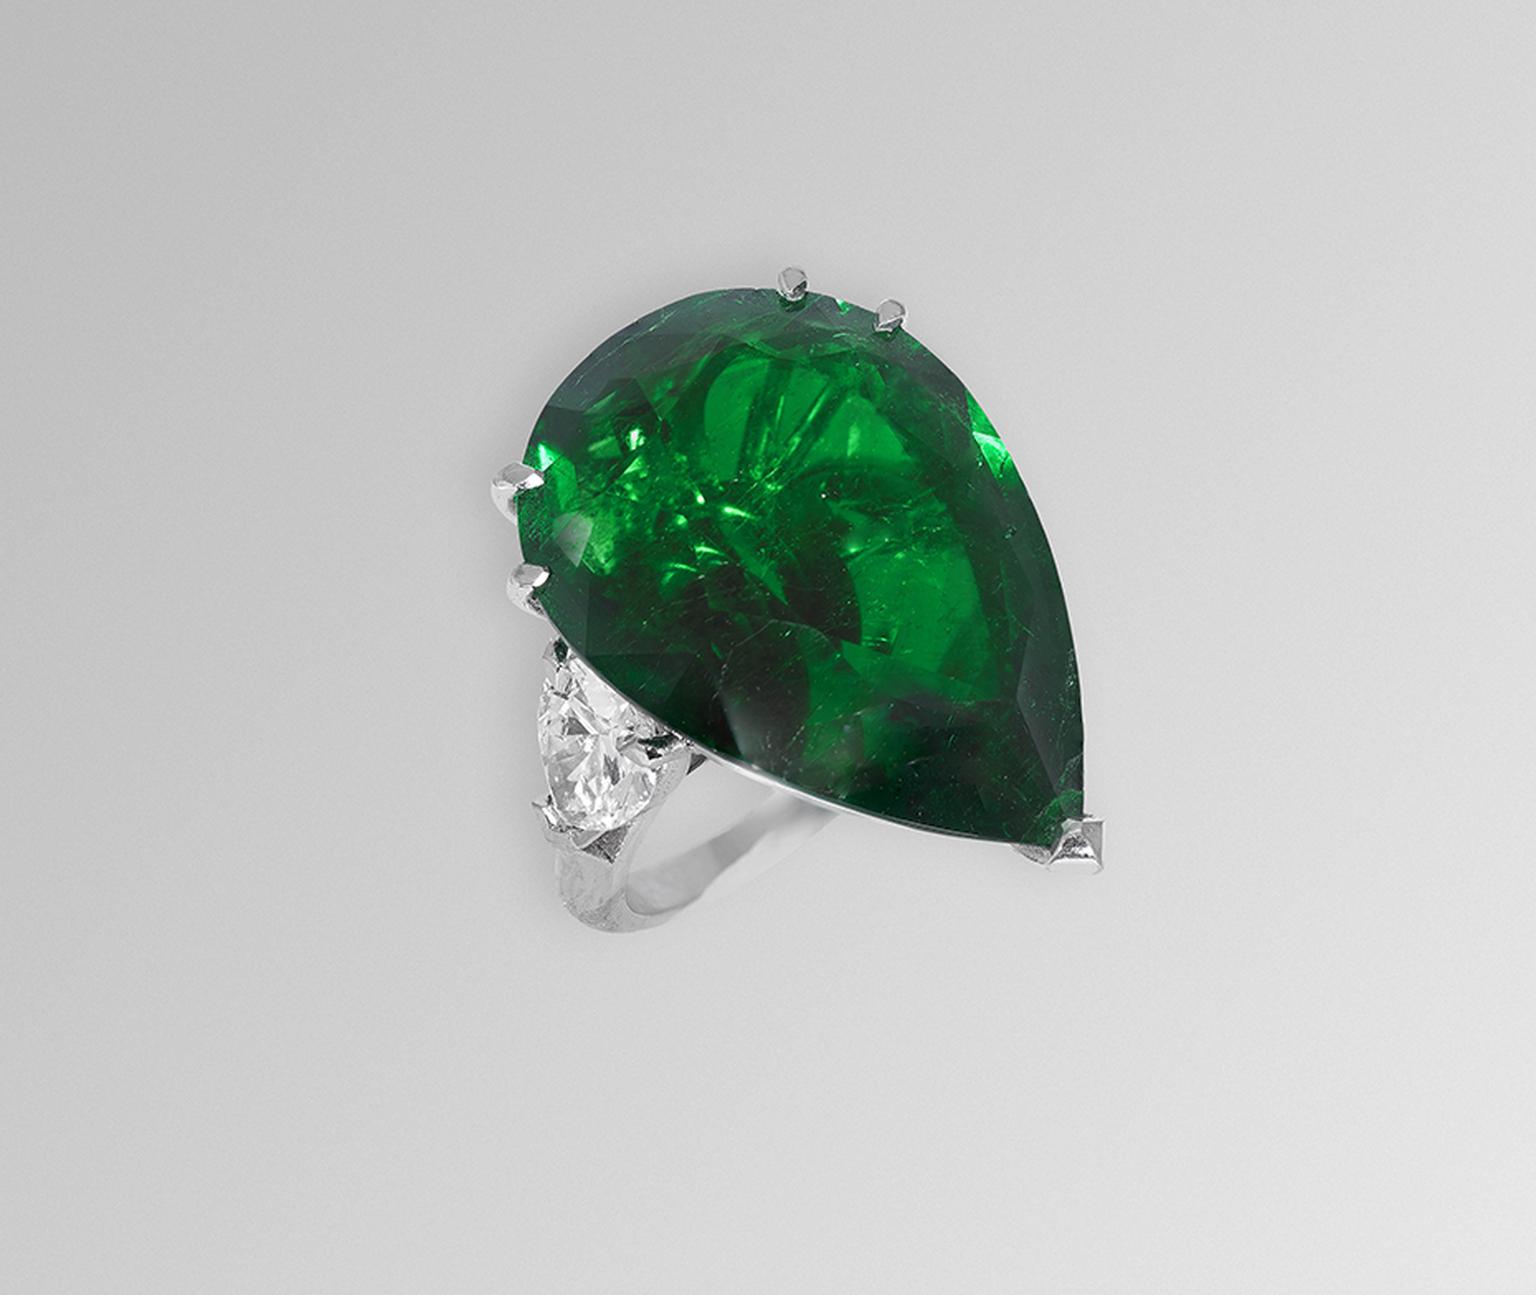 One-of-a-kind David Morris emerald ring.